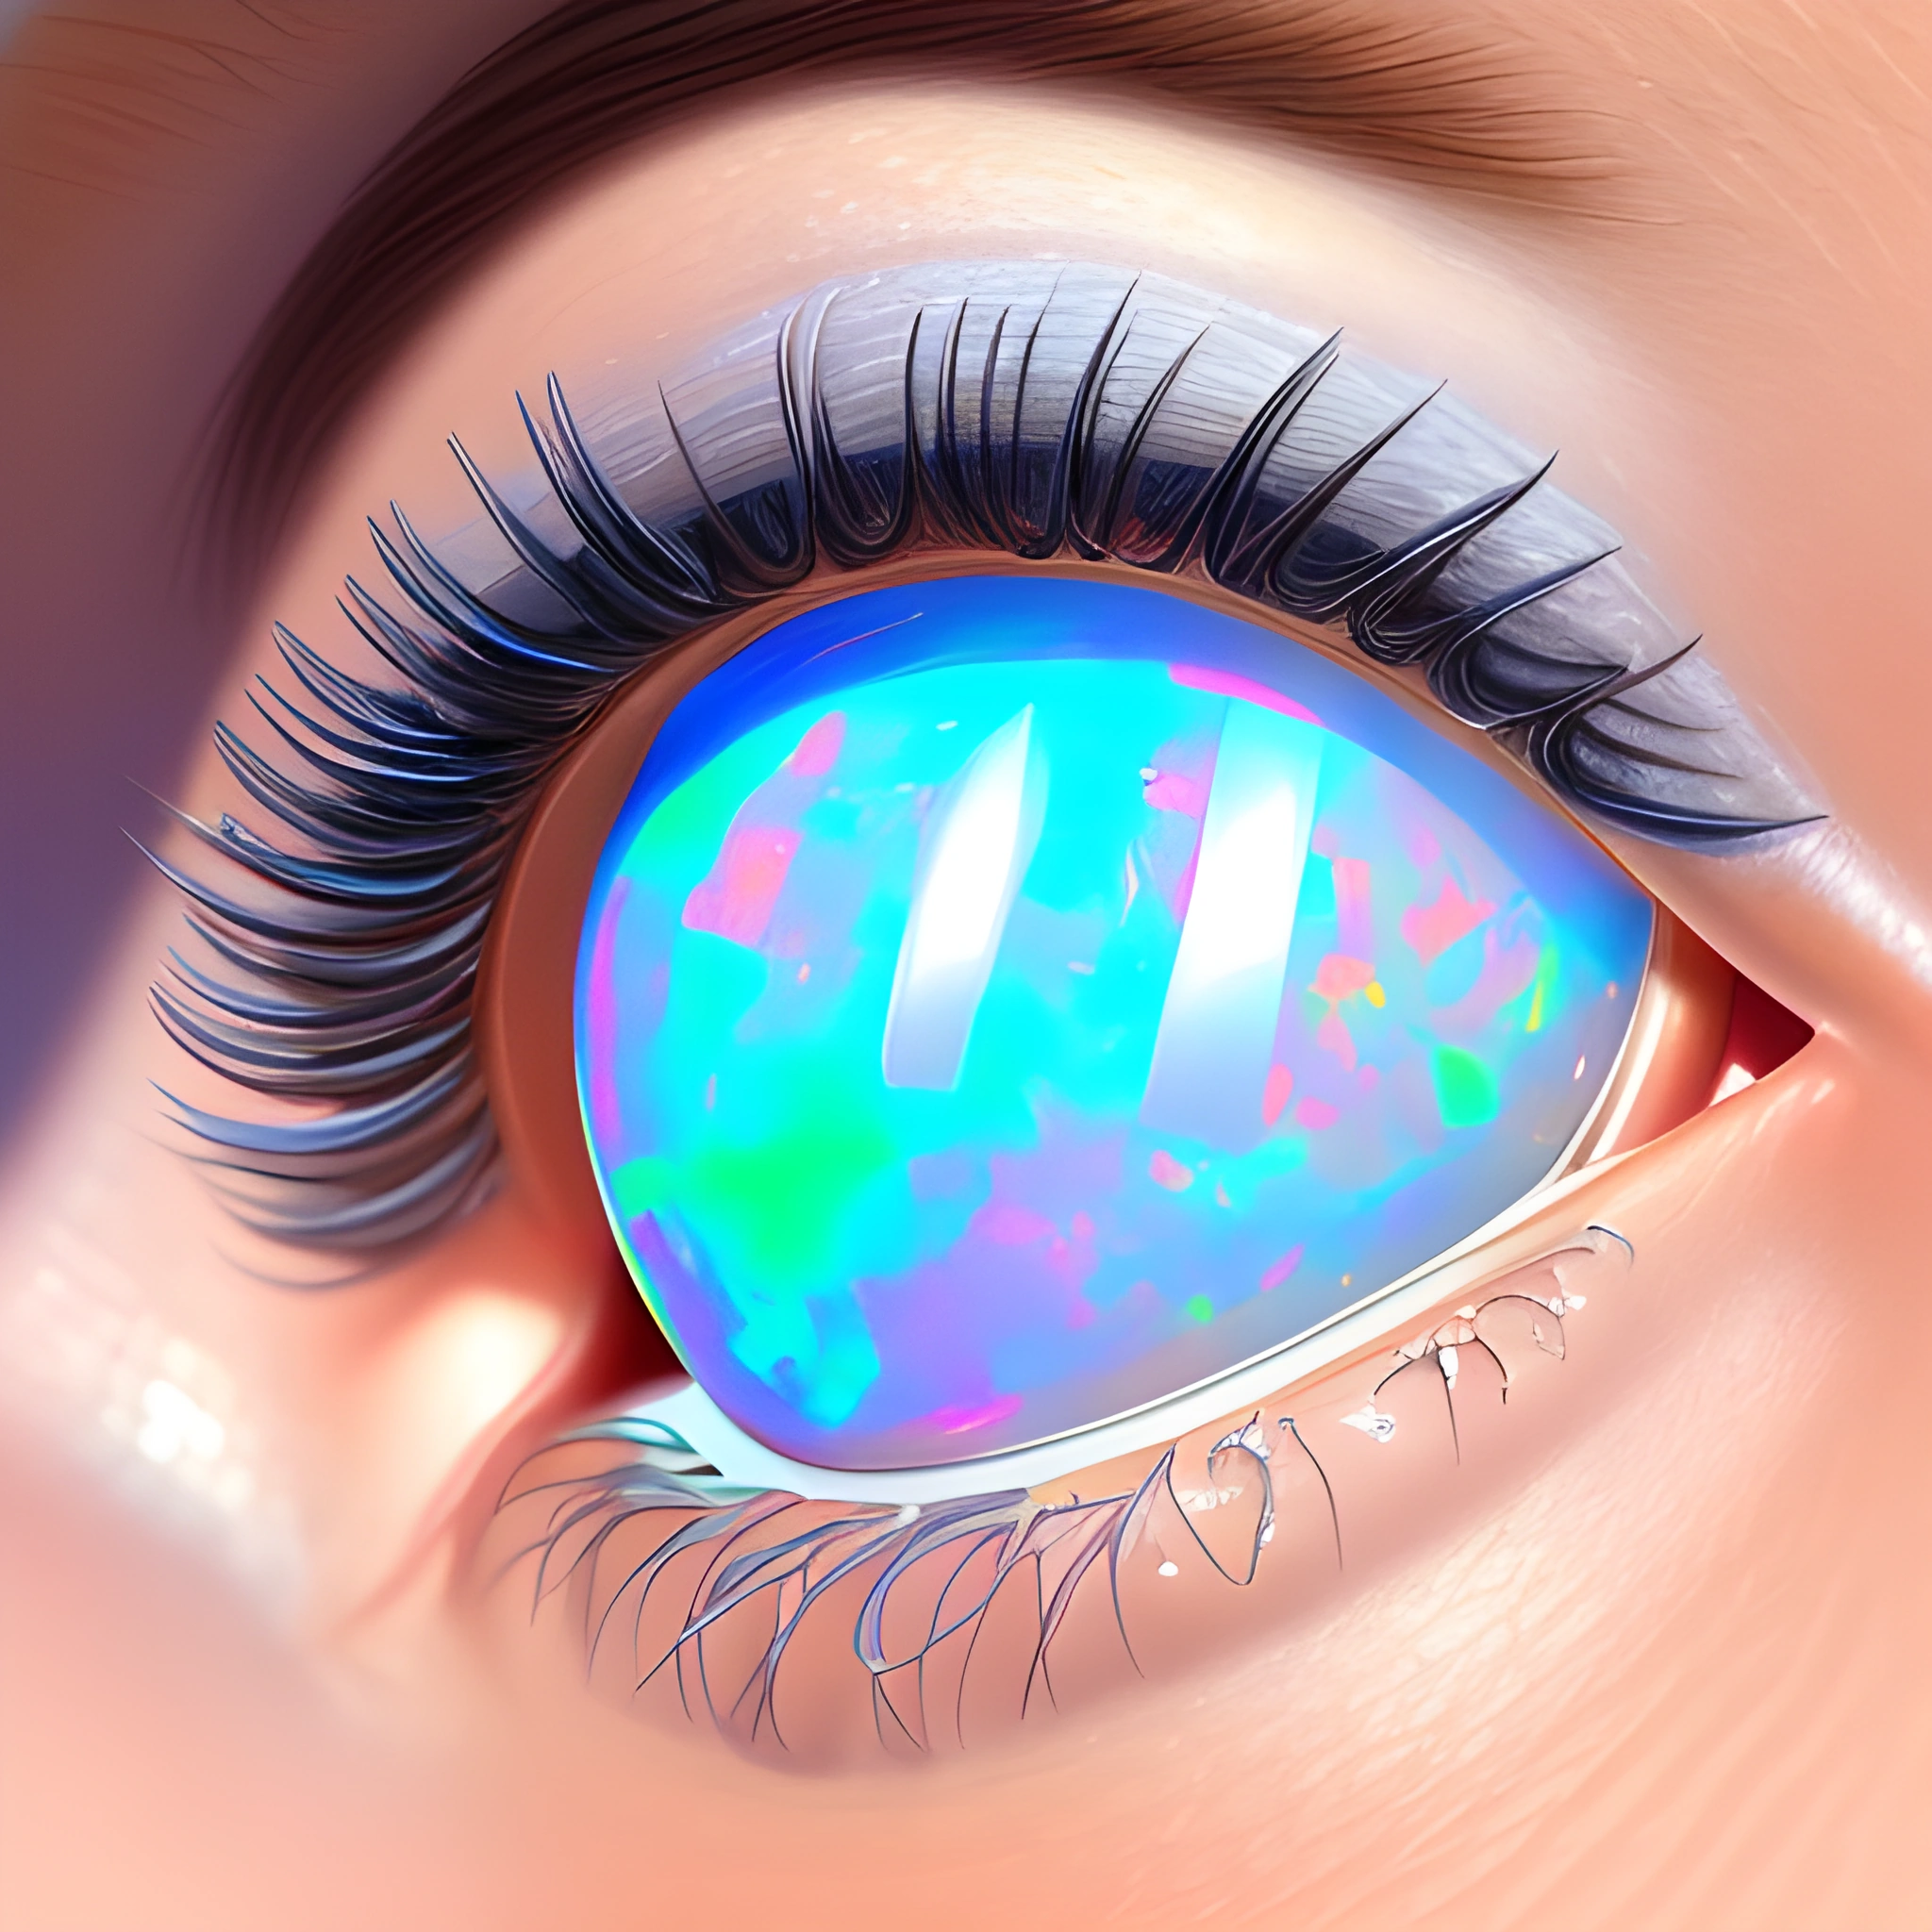 a close up of a woman's eye with a blue and green oplite